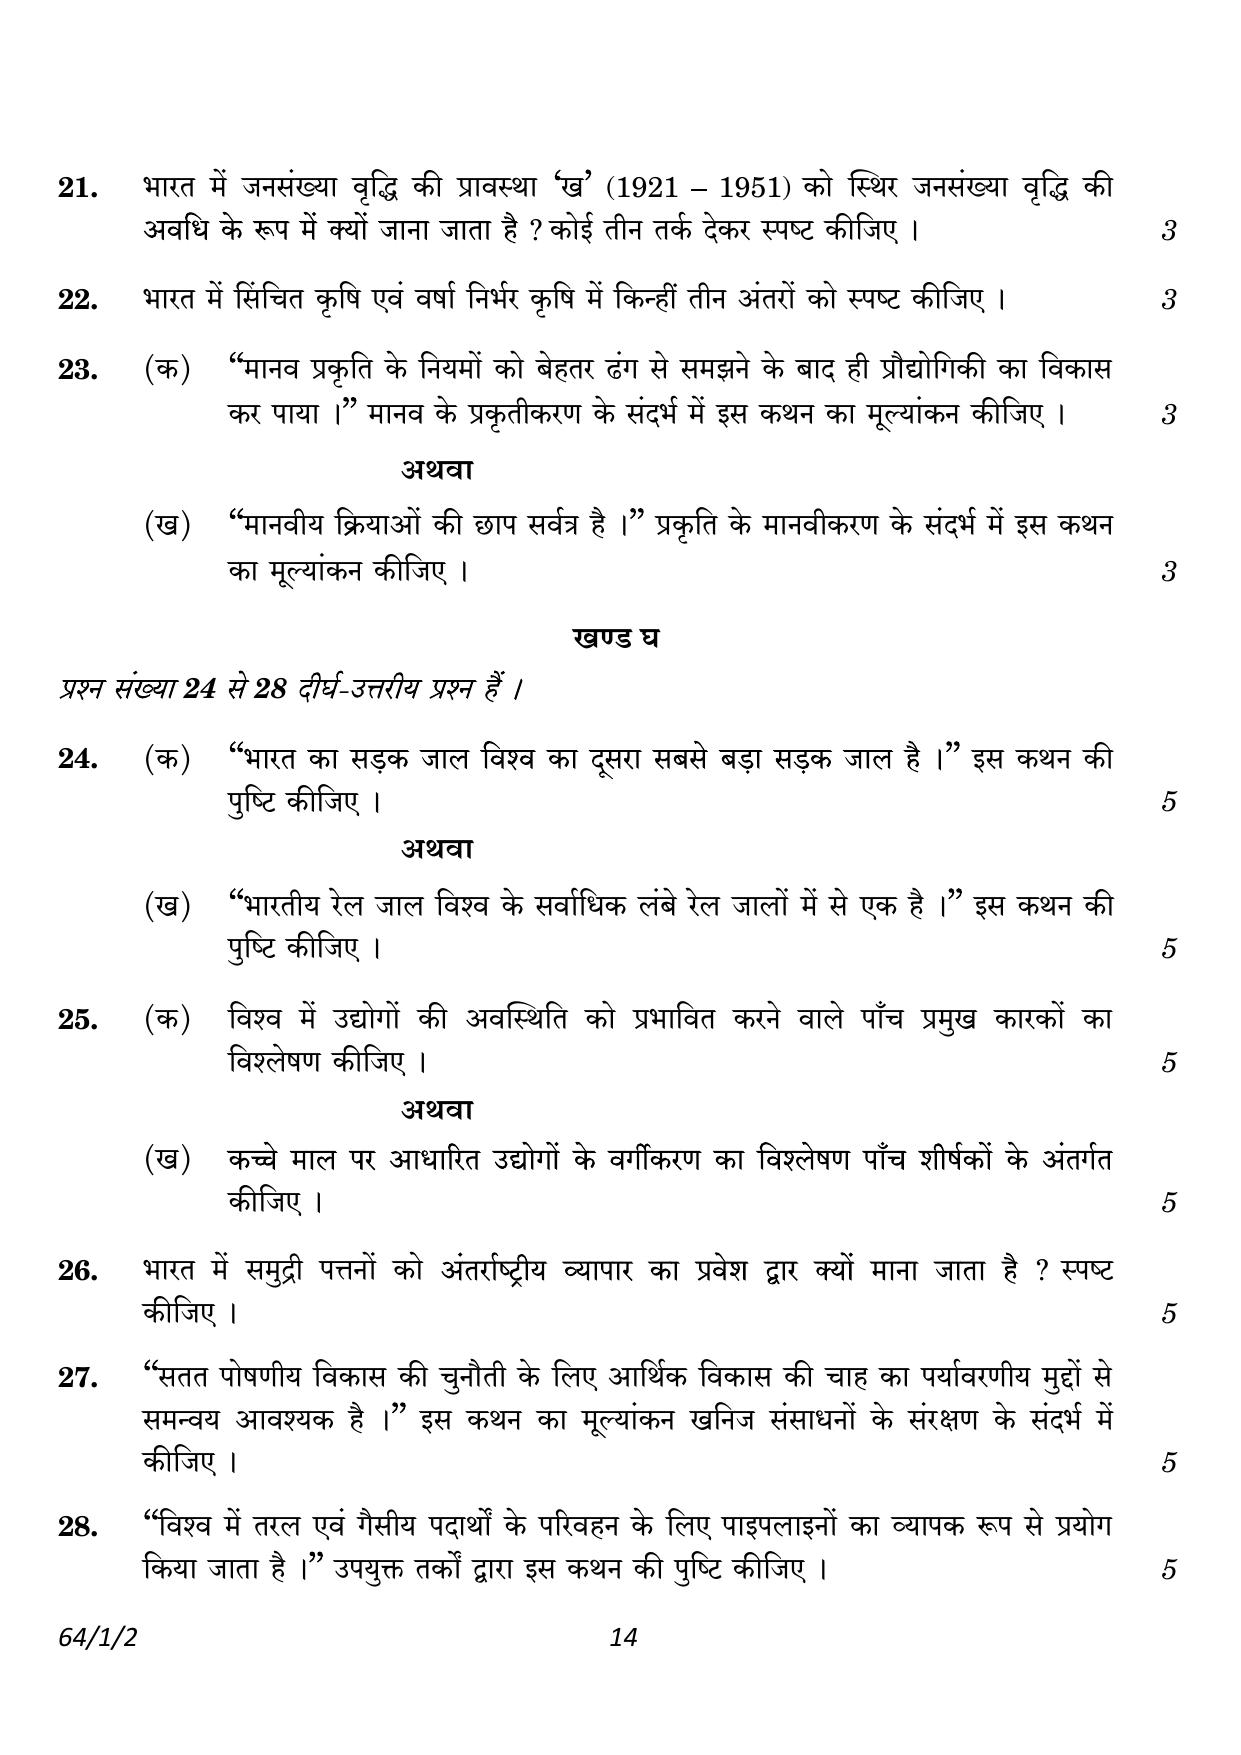 CBSE Class 12 64-1-2 Geography 2023 Question Paper - Page 14